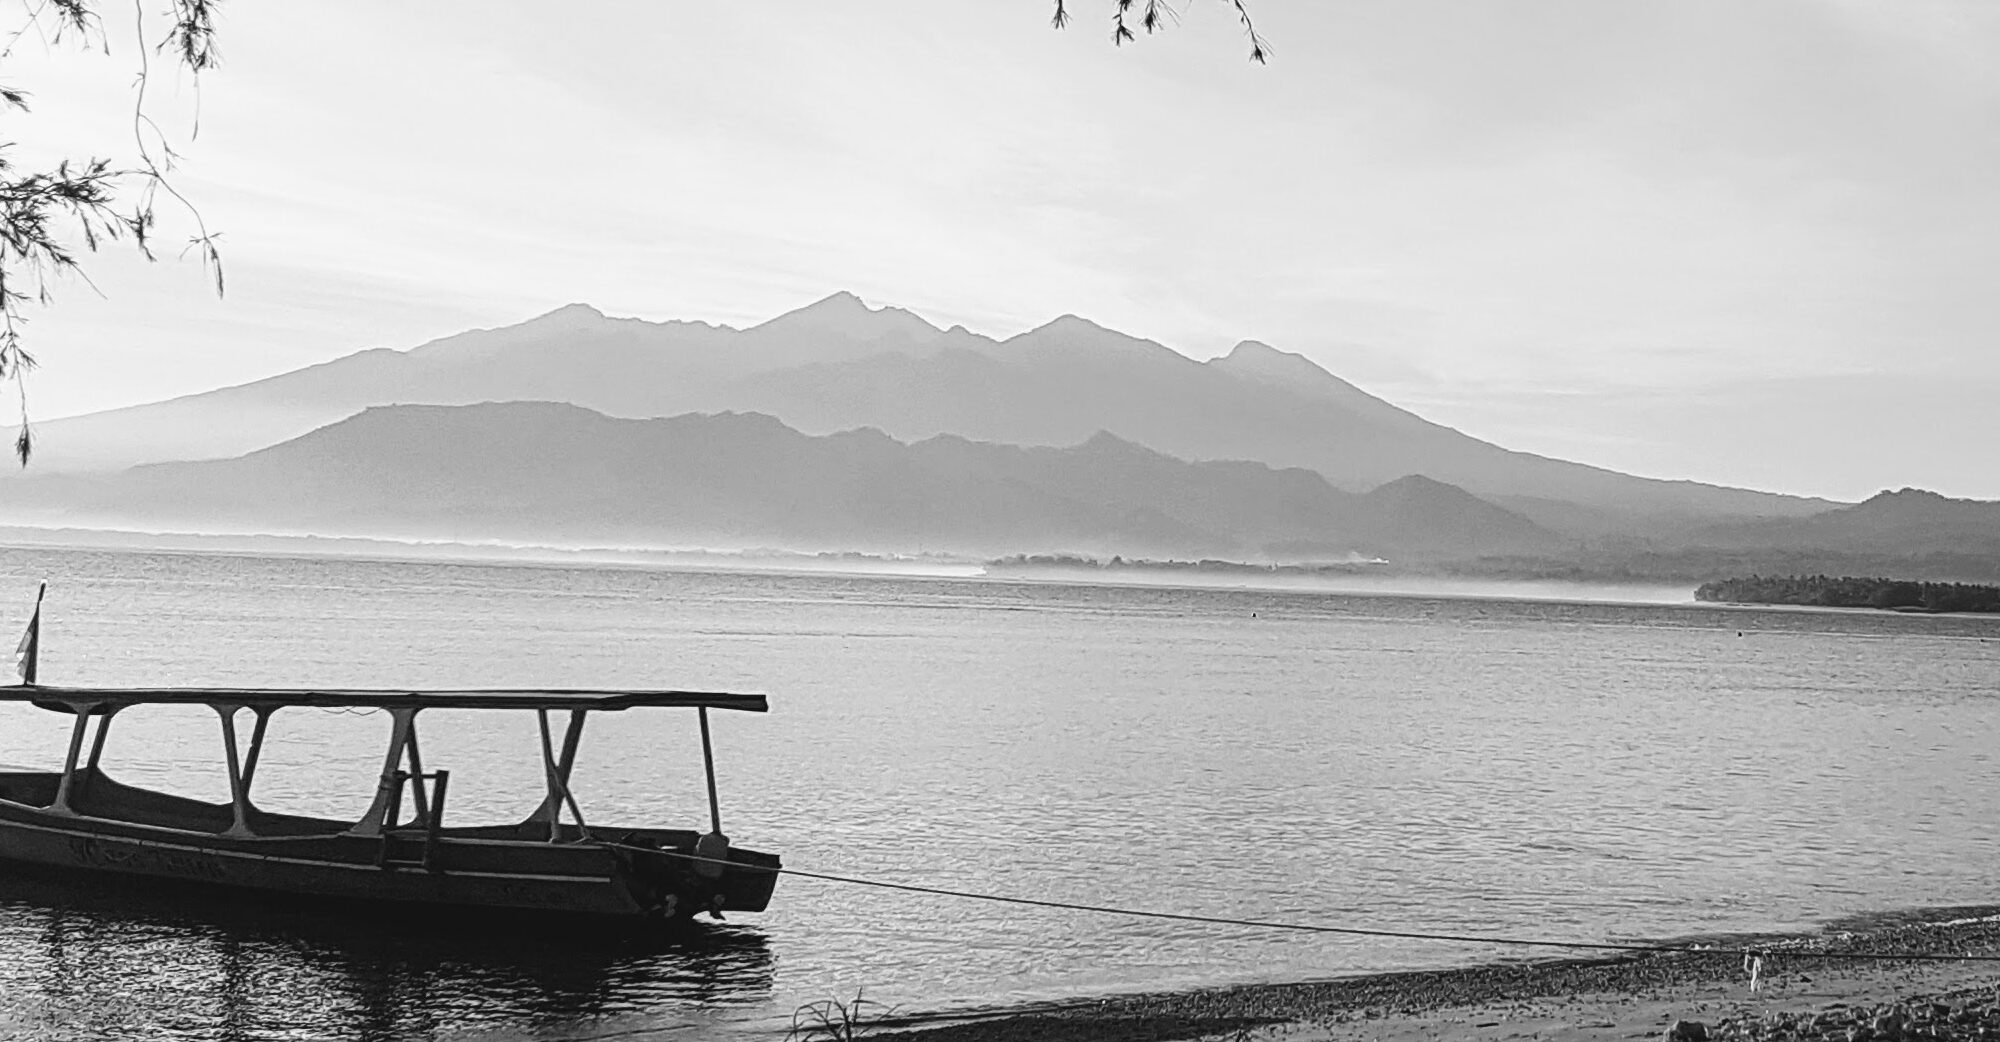 Image – ‘Empty Boat’ - Gili Air, Indonesia - August 2016